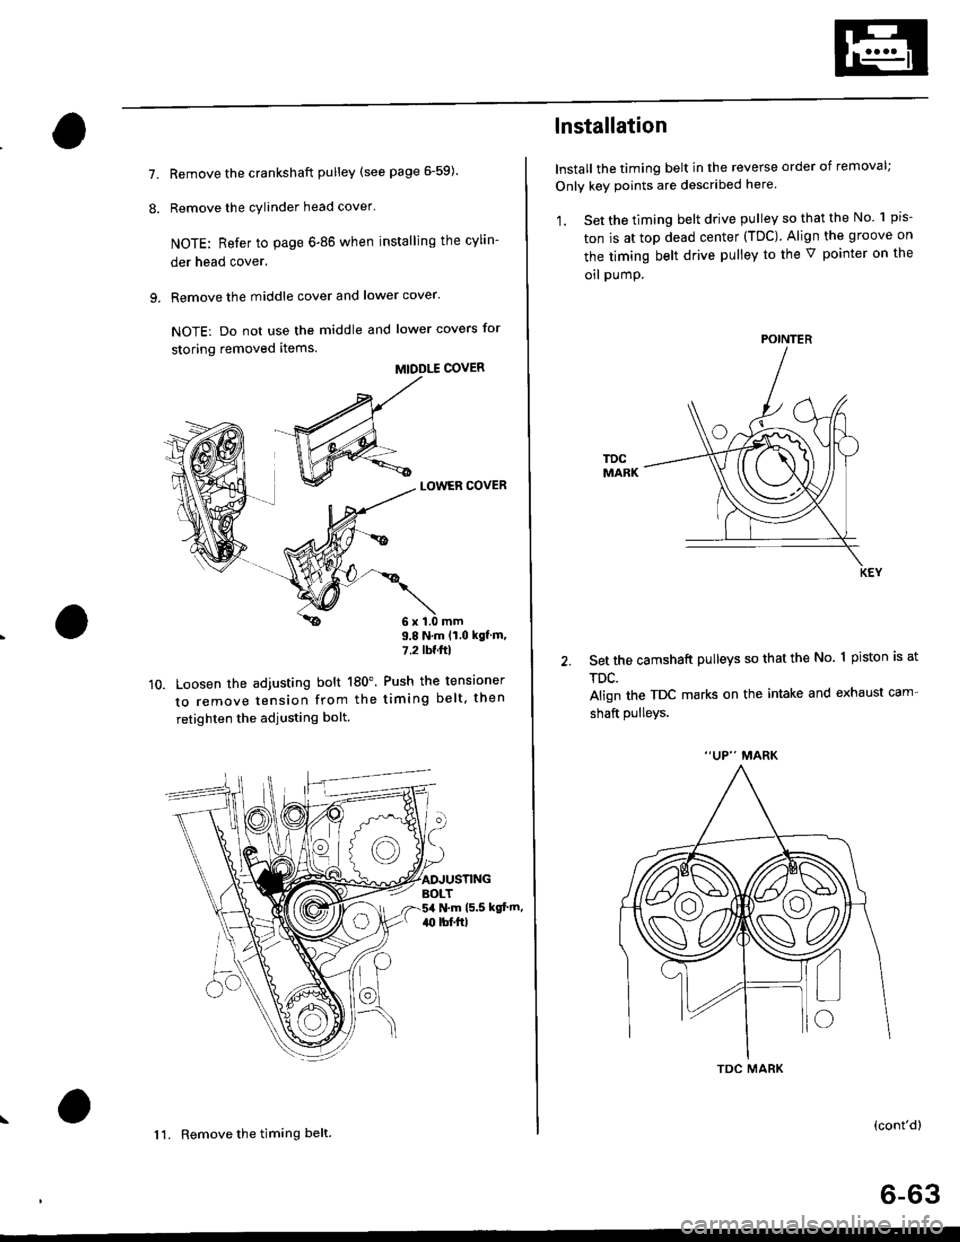 HONDA CIVIC 1998 6.G User Guide 7.
8.
Remove the crankshaft pulley (see page 6-59).
Remove the cylinder head cover
NOTE: Refer to page 6-86 when installing the cylin-
der head cover.
Remove the middle cover and lower cover.
NOTE: D